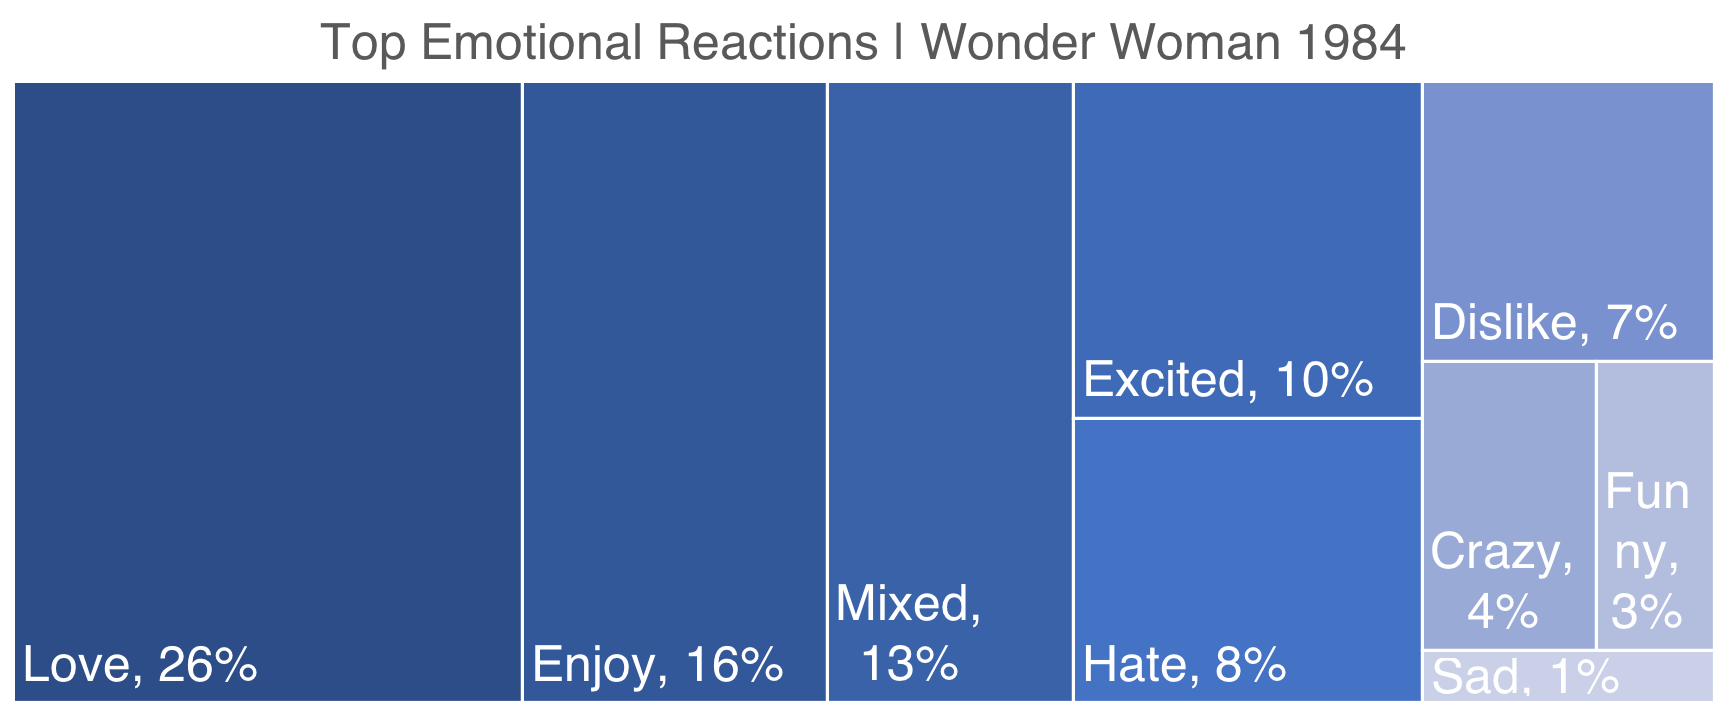 Source: Canvs, Top Emotional Reactions from Wonder Woman 1984,12/25/20 - 1/11/21